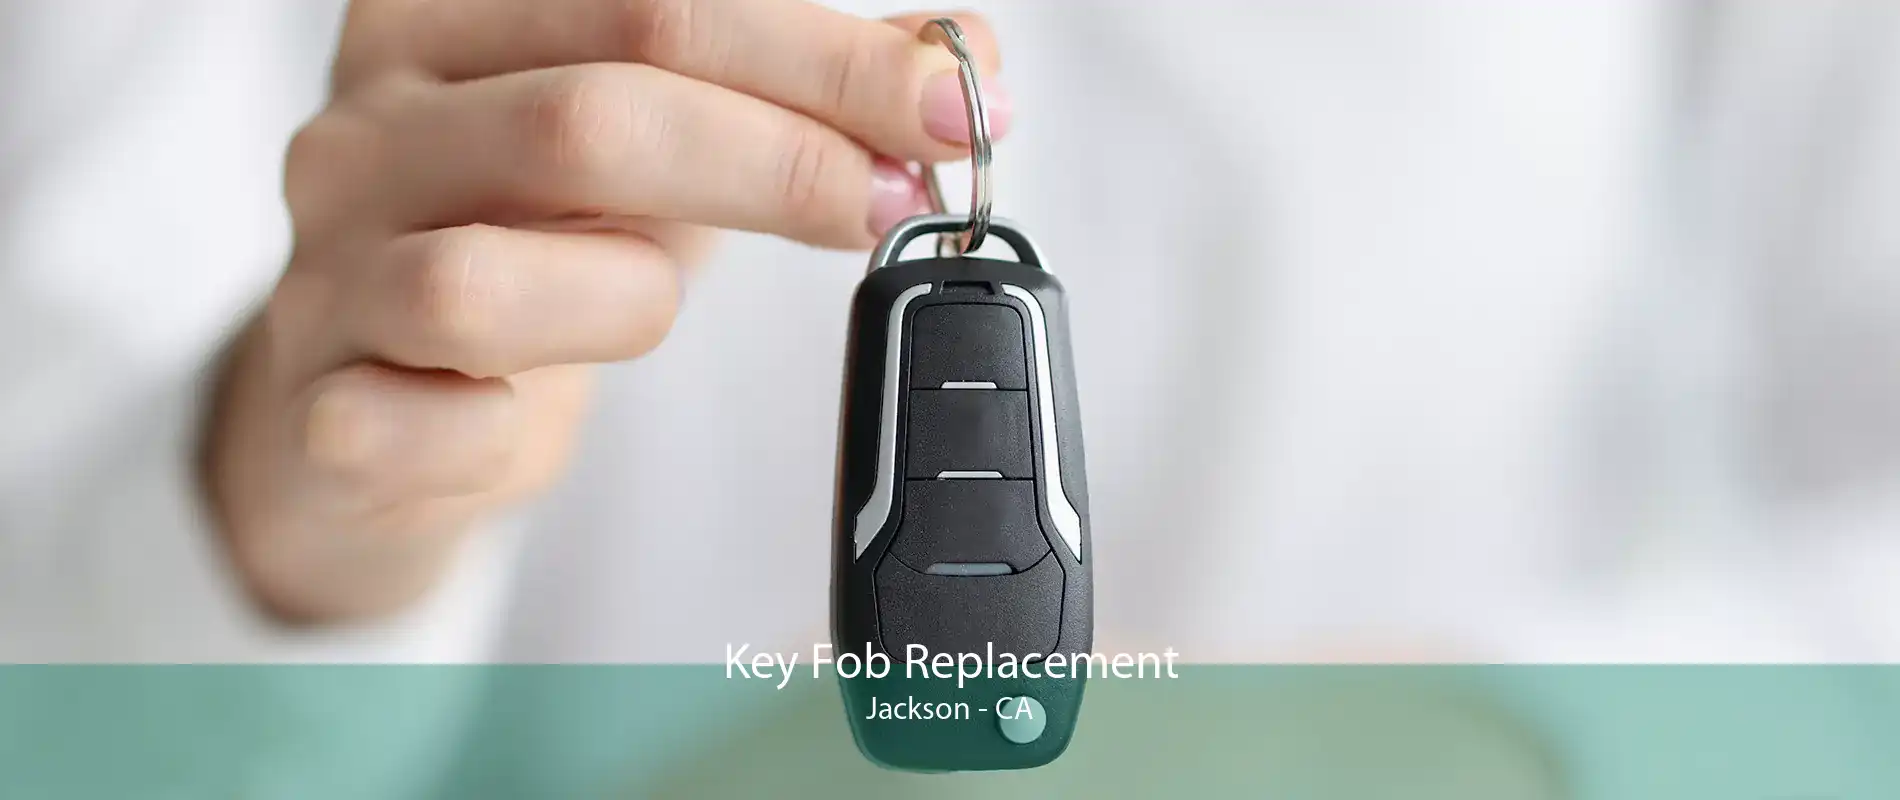 Key Fob Replacement Jackson - CA